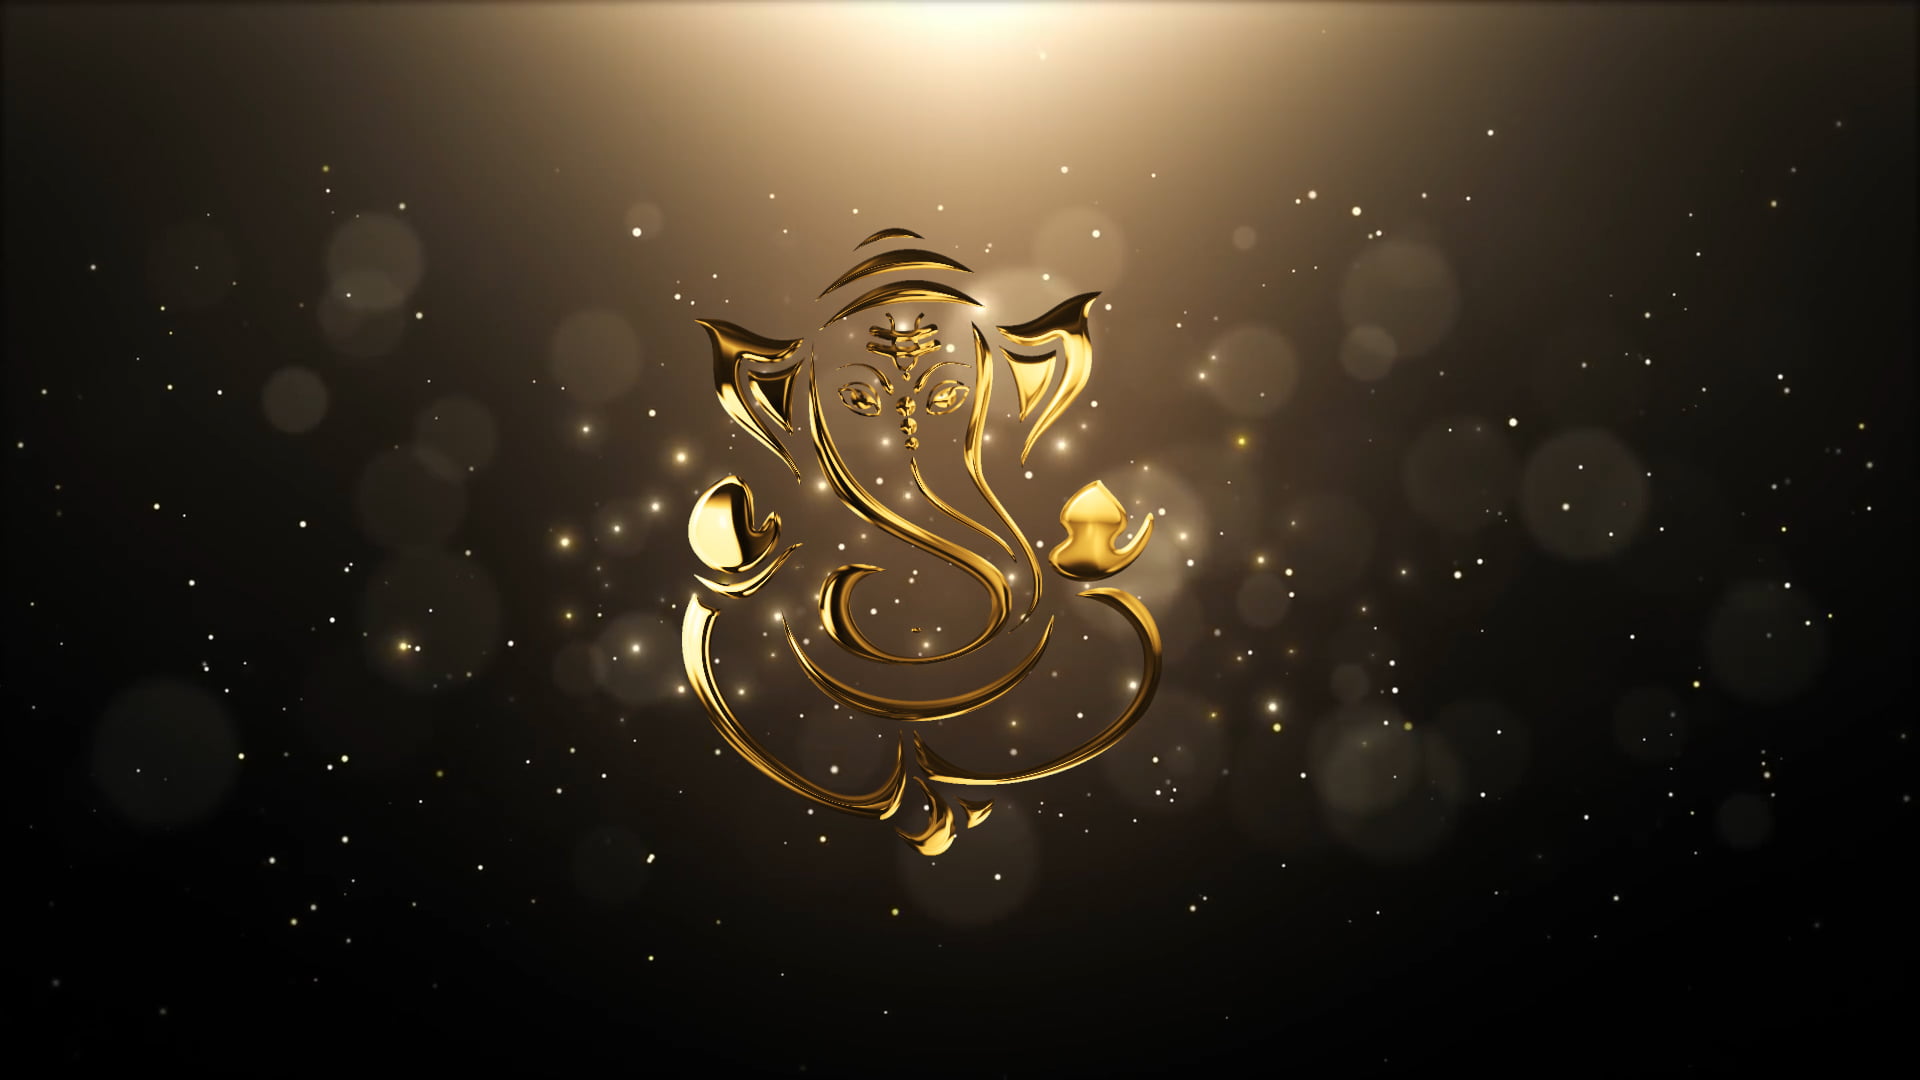 4K Shree Ganesh Animated Golden Intro Footage For Wedding Free Download  Vol-4